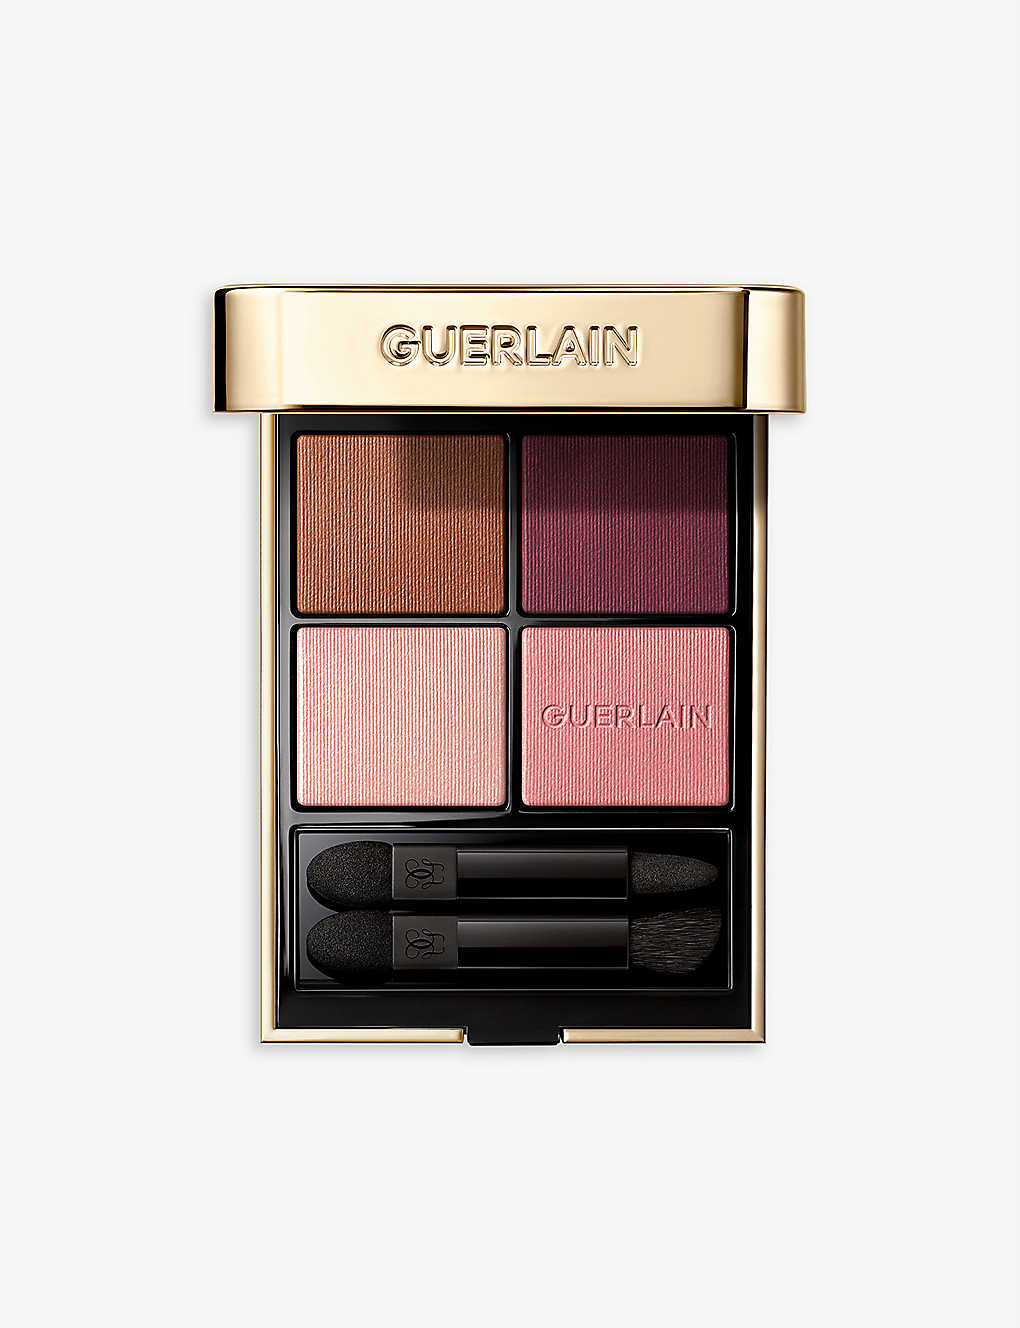 Guerlain Ombres G Eyeshadow Quad 6g In 530 Majestic Rose